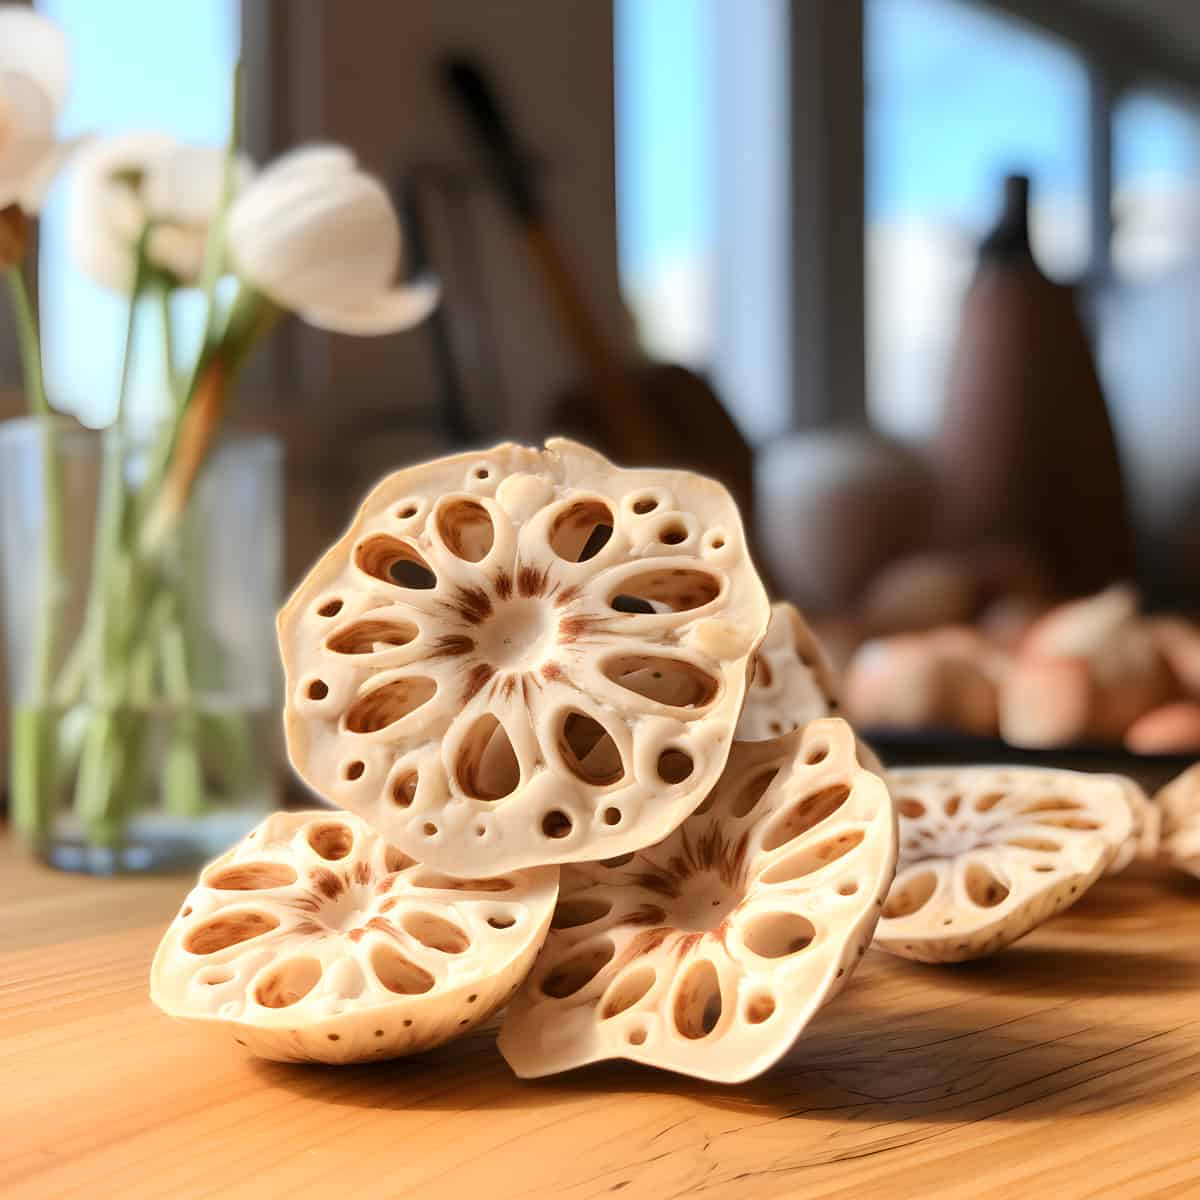 Lotus Root on a kitchen counter